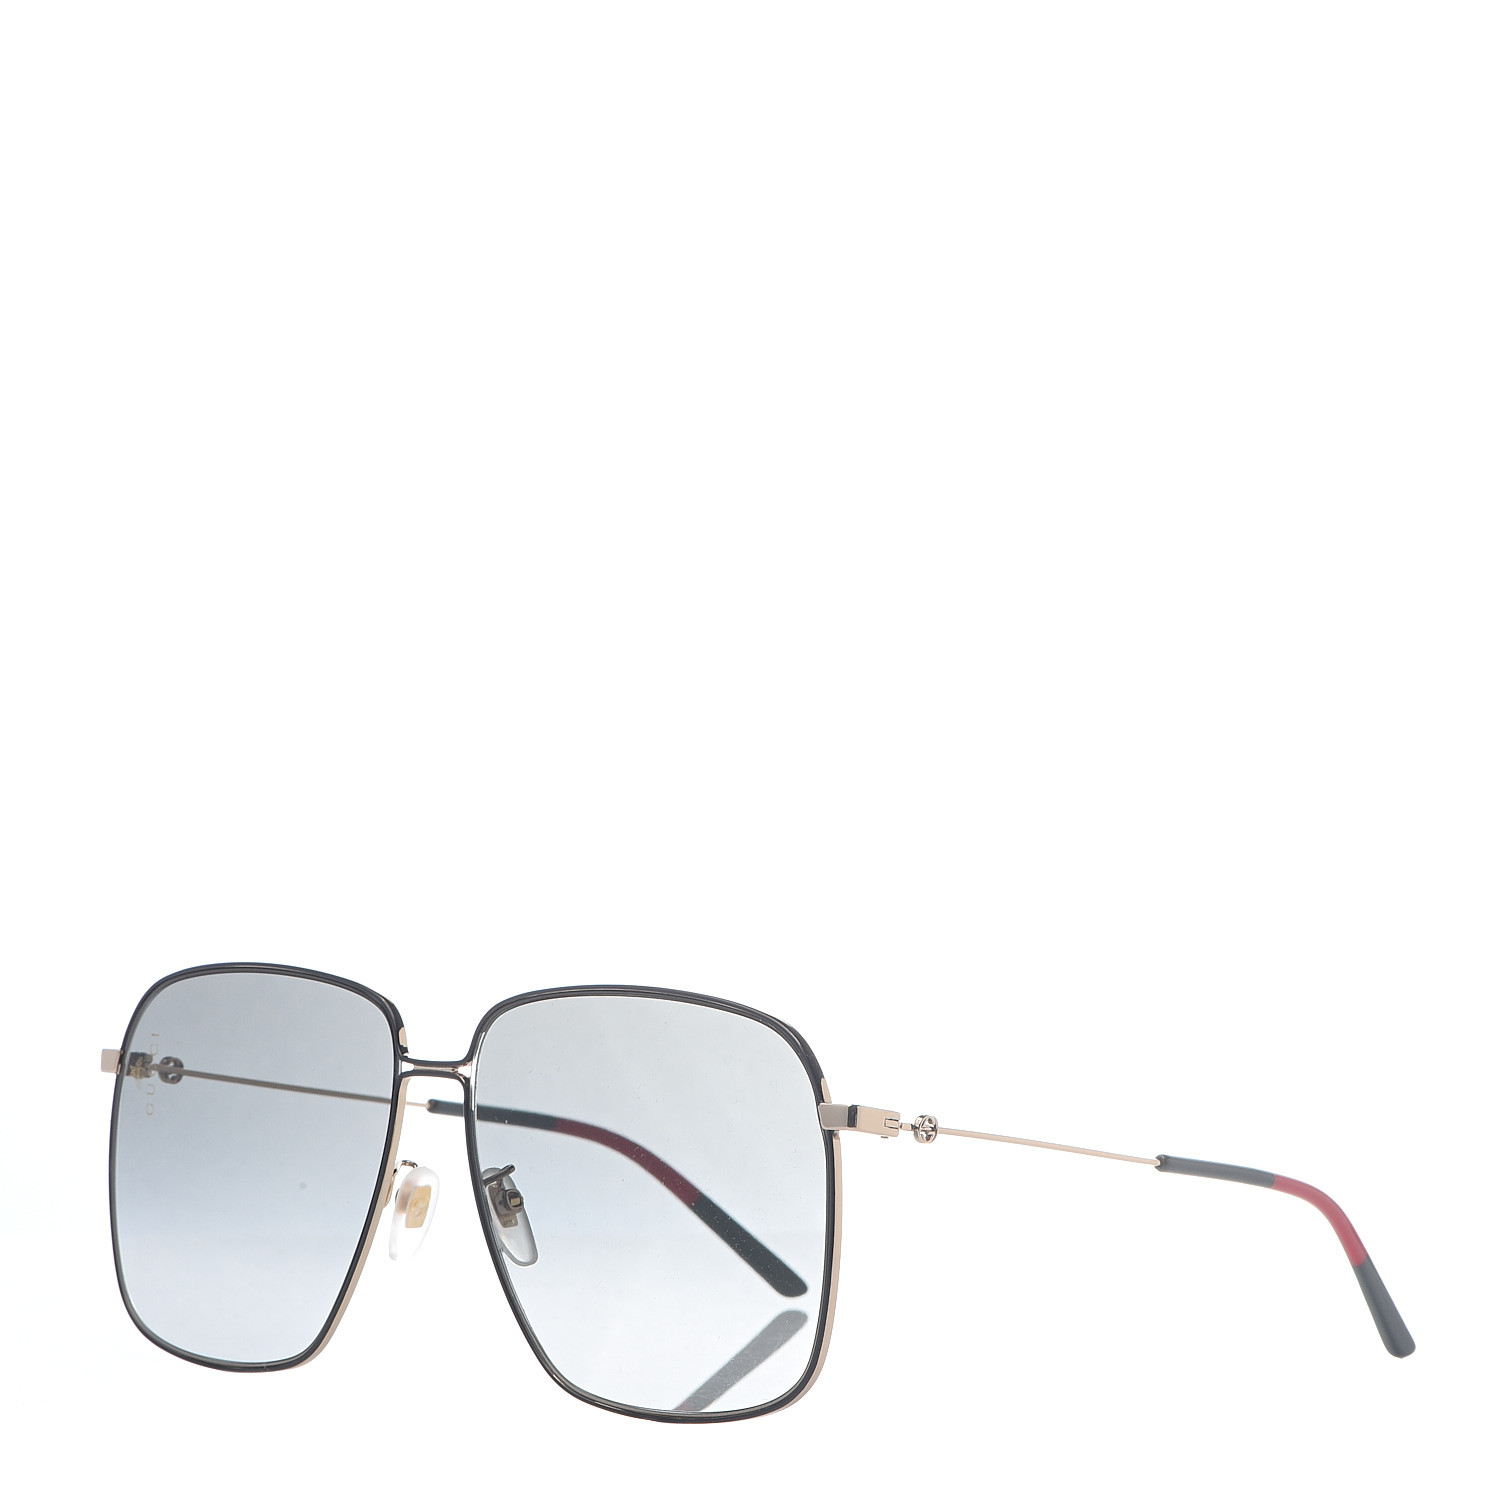 gucci sunglasses green red frame